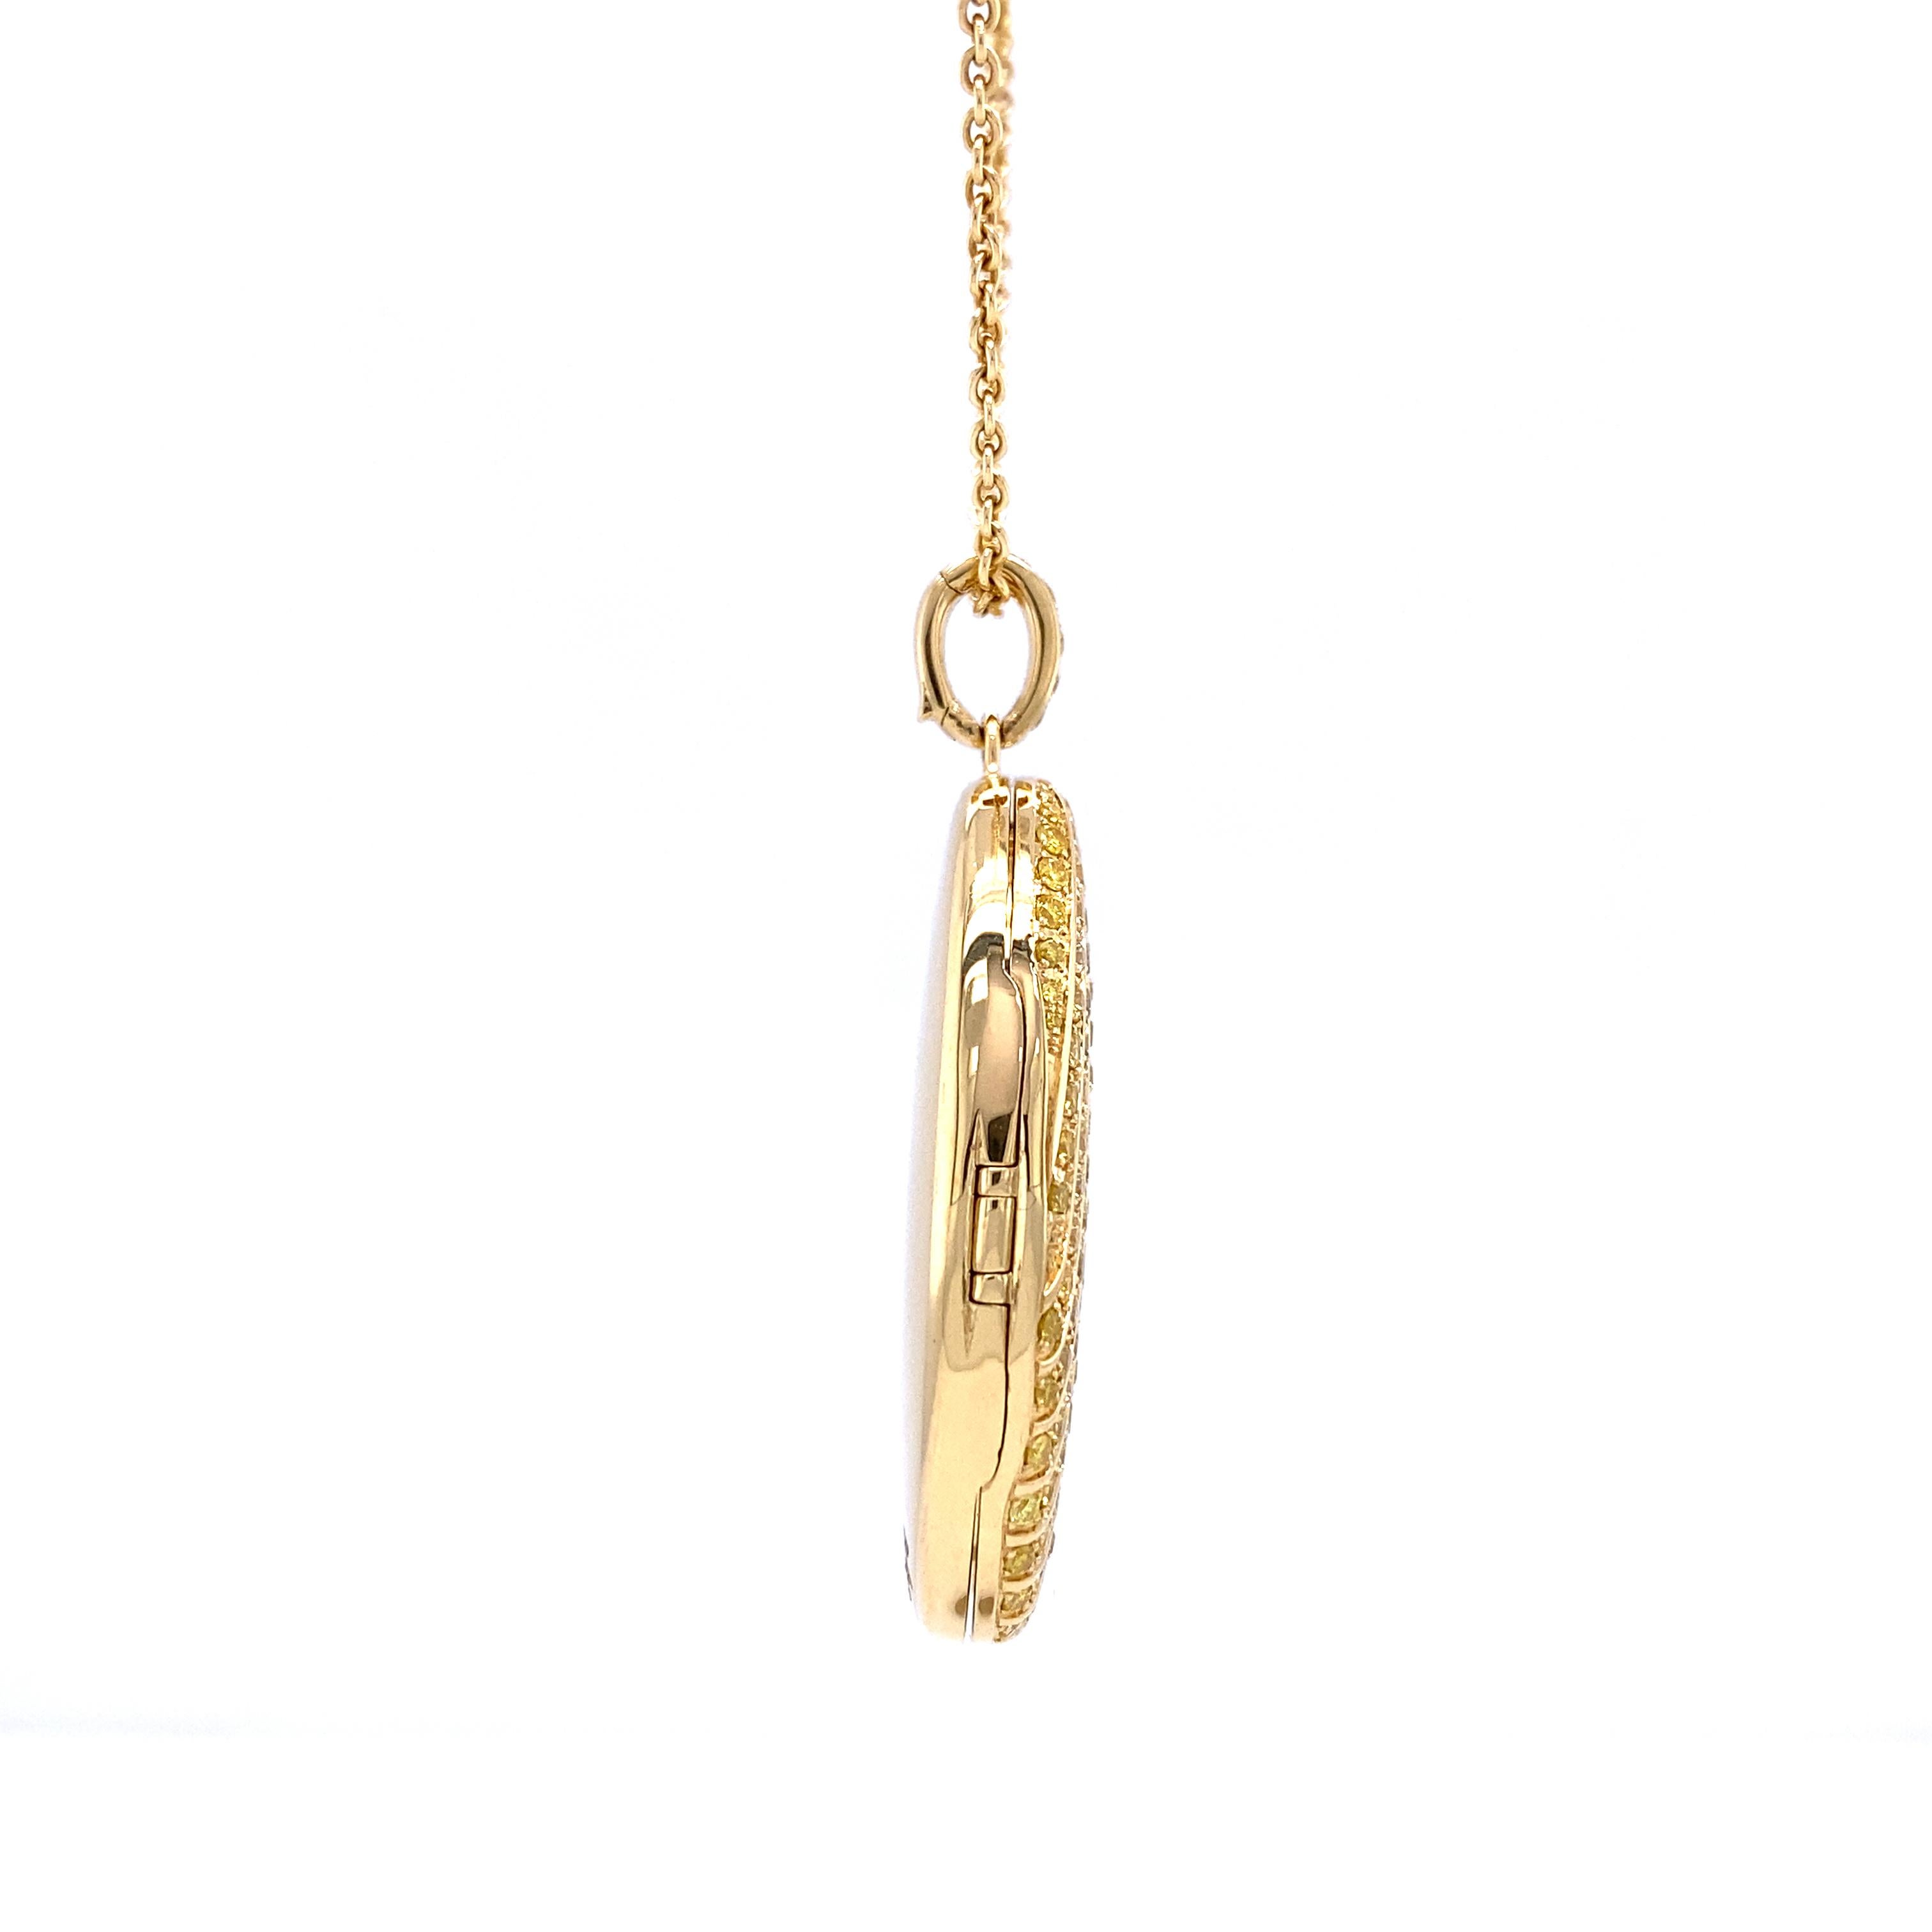 Victor Mayer Calima Locket Necklace in 18k Yellow Gold 155 Fancy Yellow Diamonds For Sale 2